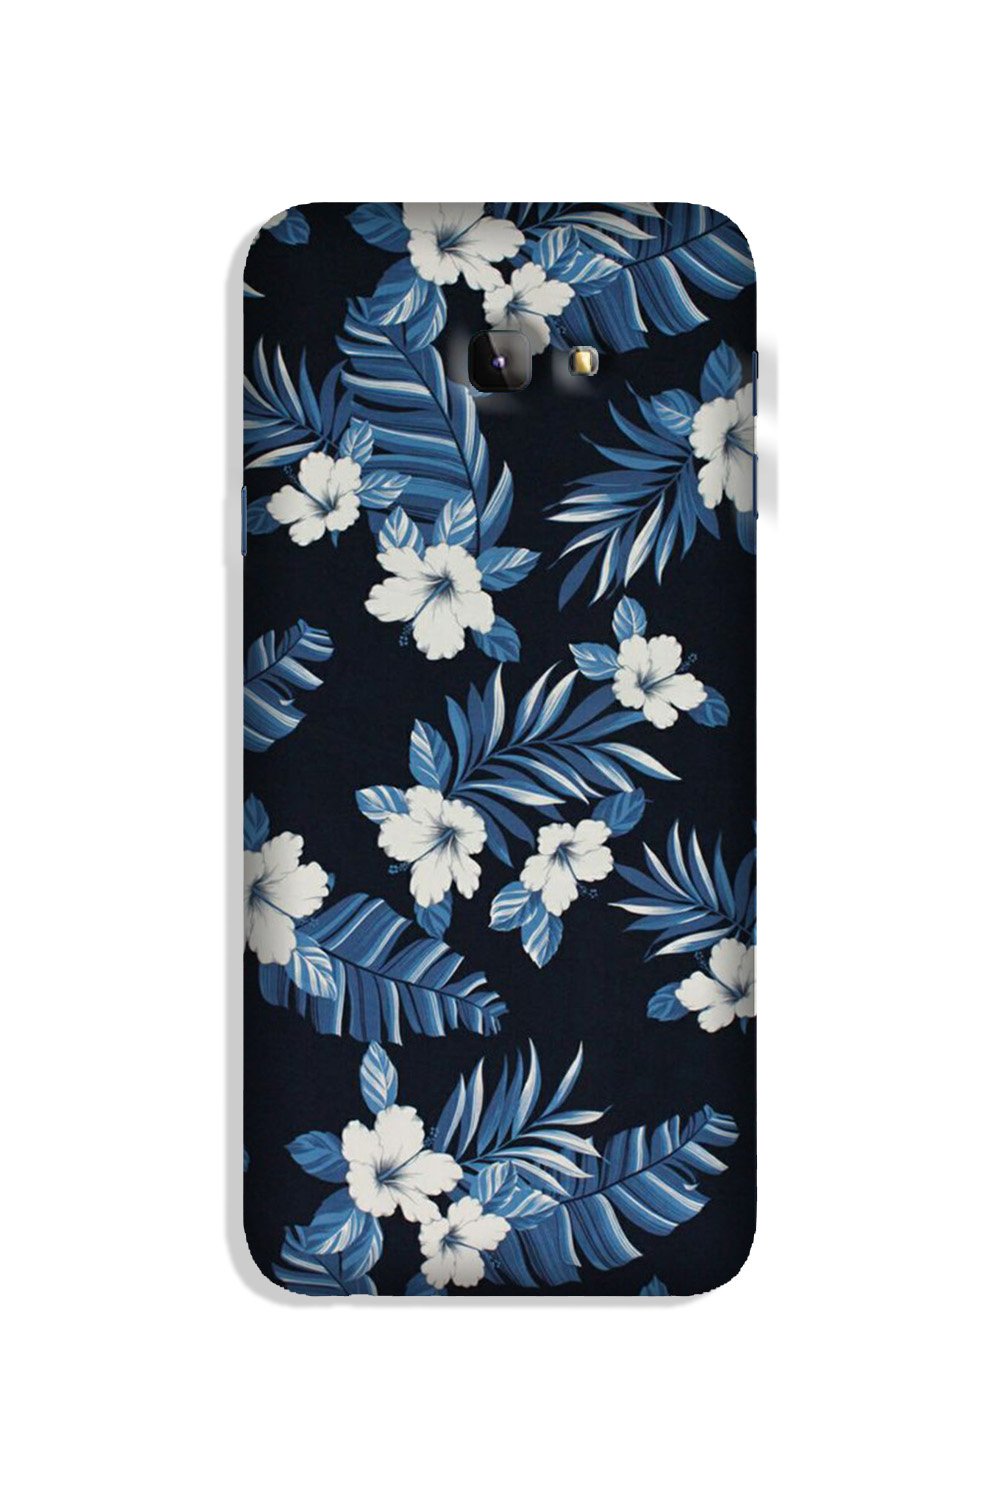 White flowers Blue Background2 Case for Galaxy J4 Plus